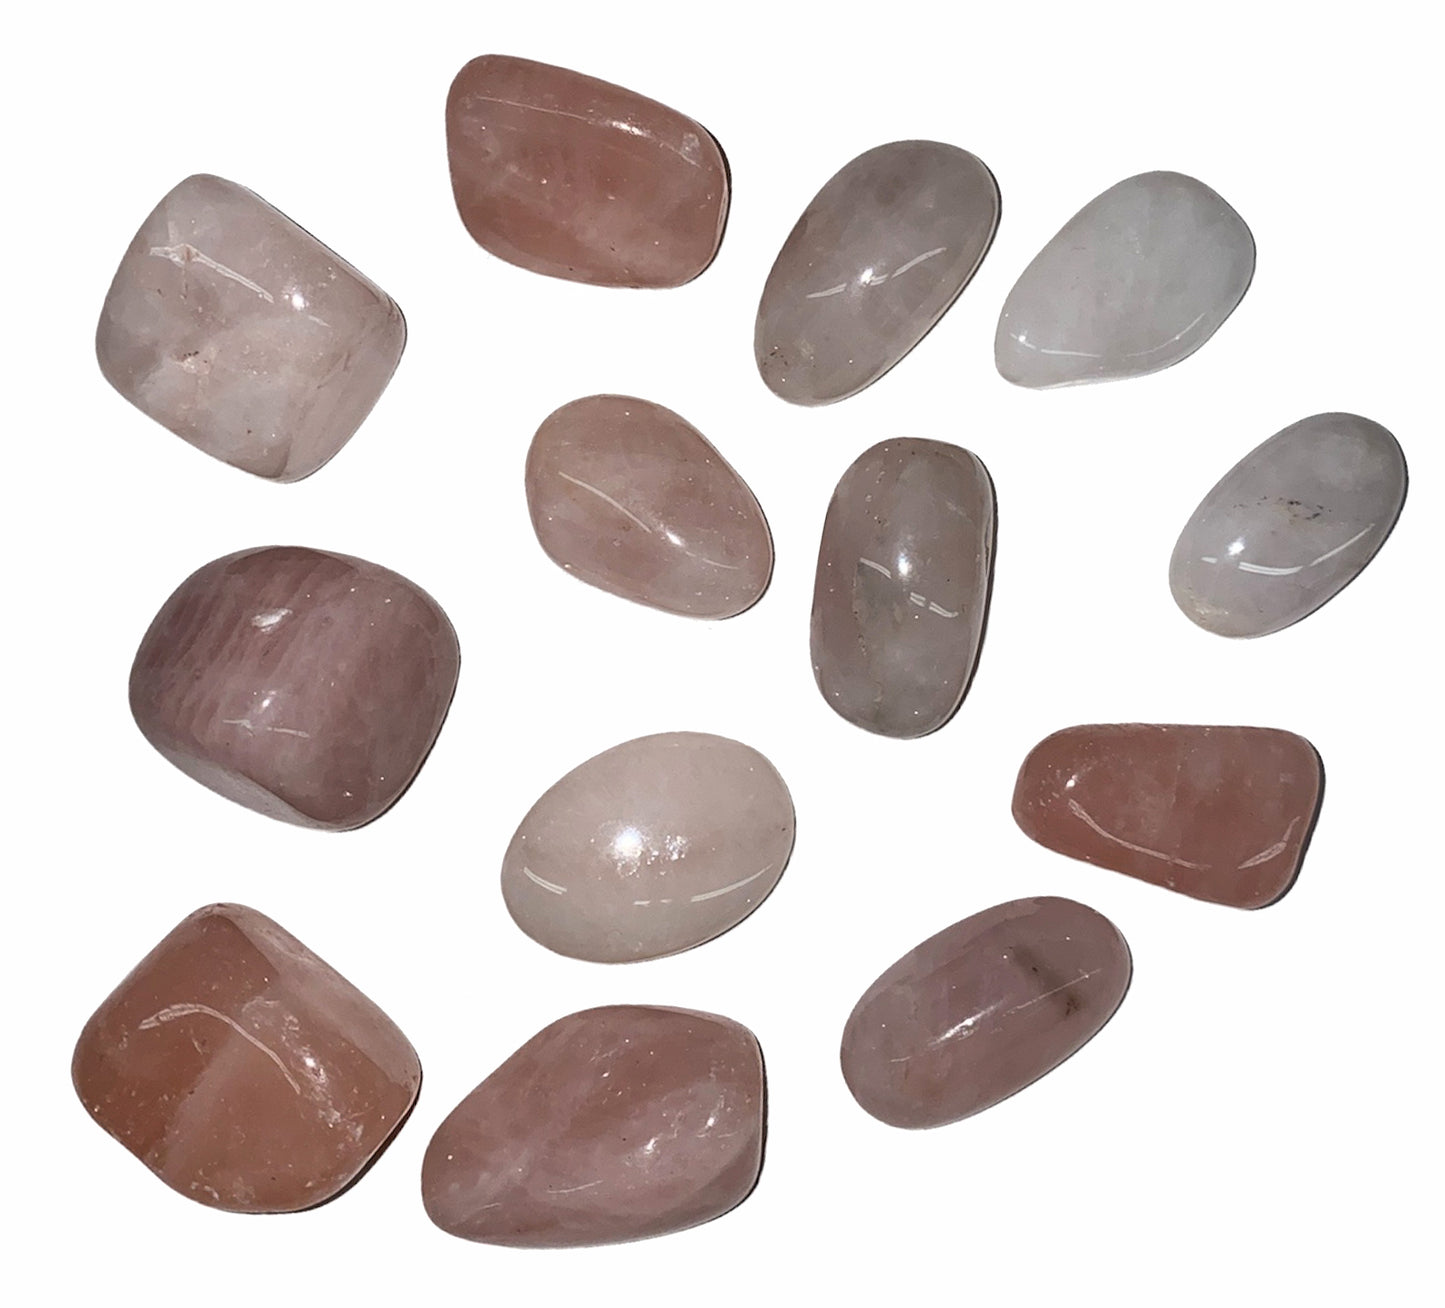 Regular Rose Quartz Tumbled Stones - Large 30 - 45 mm - 500 grams - China - Stone of Love for oneself and Universal Love